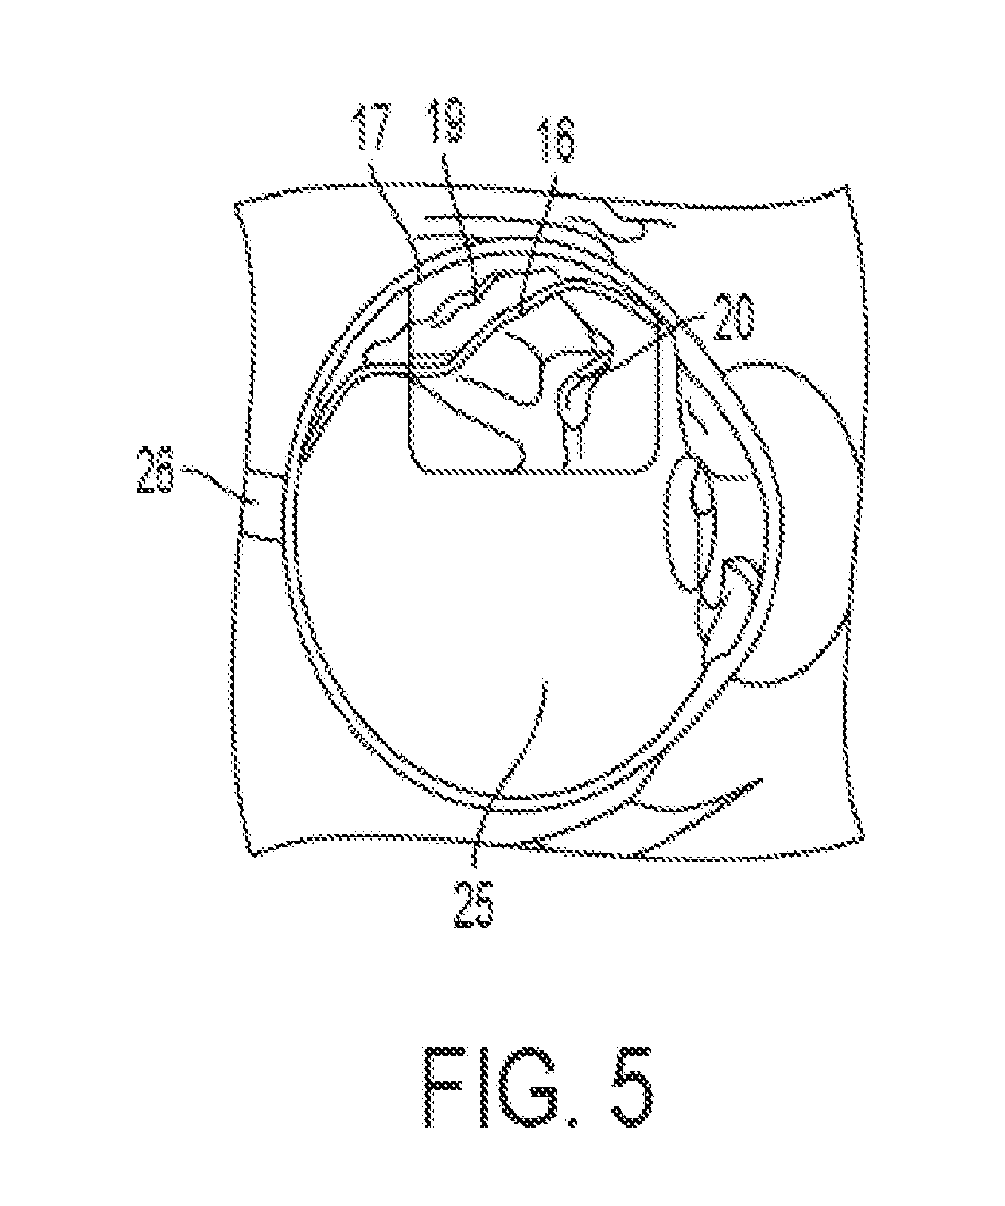 Minimally-invasive method and apparatus for restructuring the retina